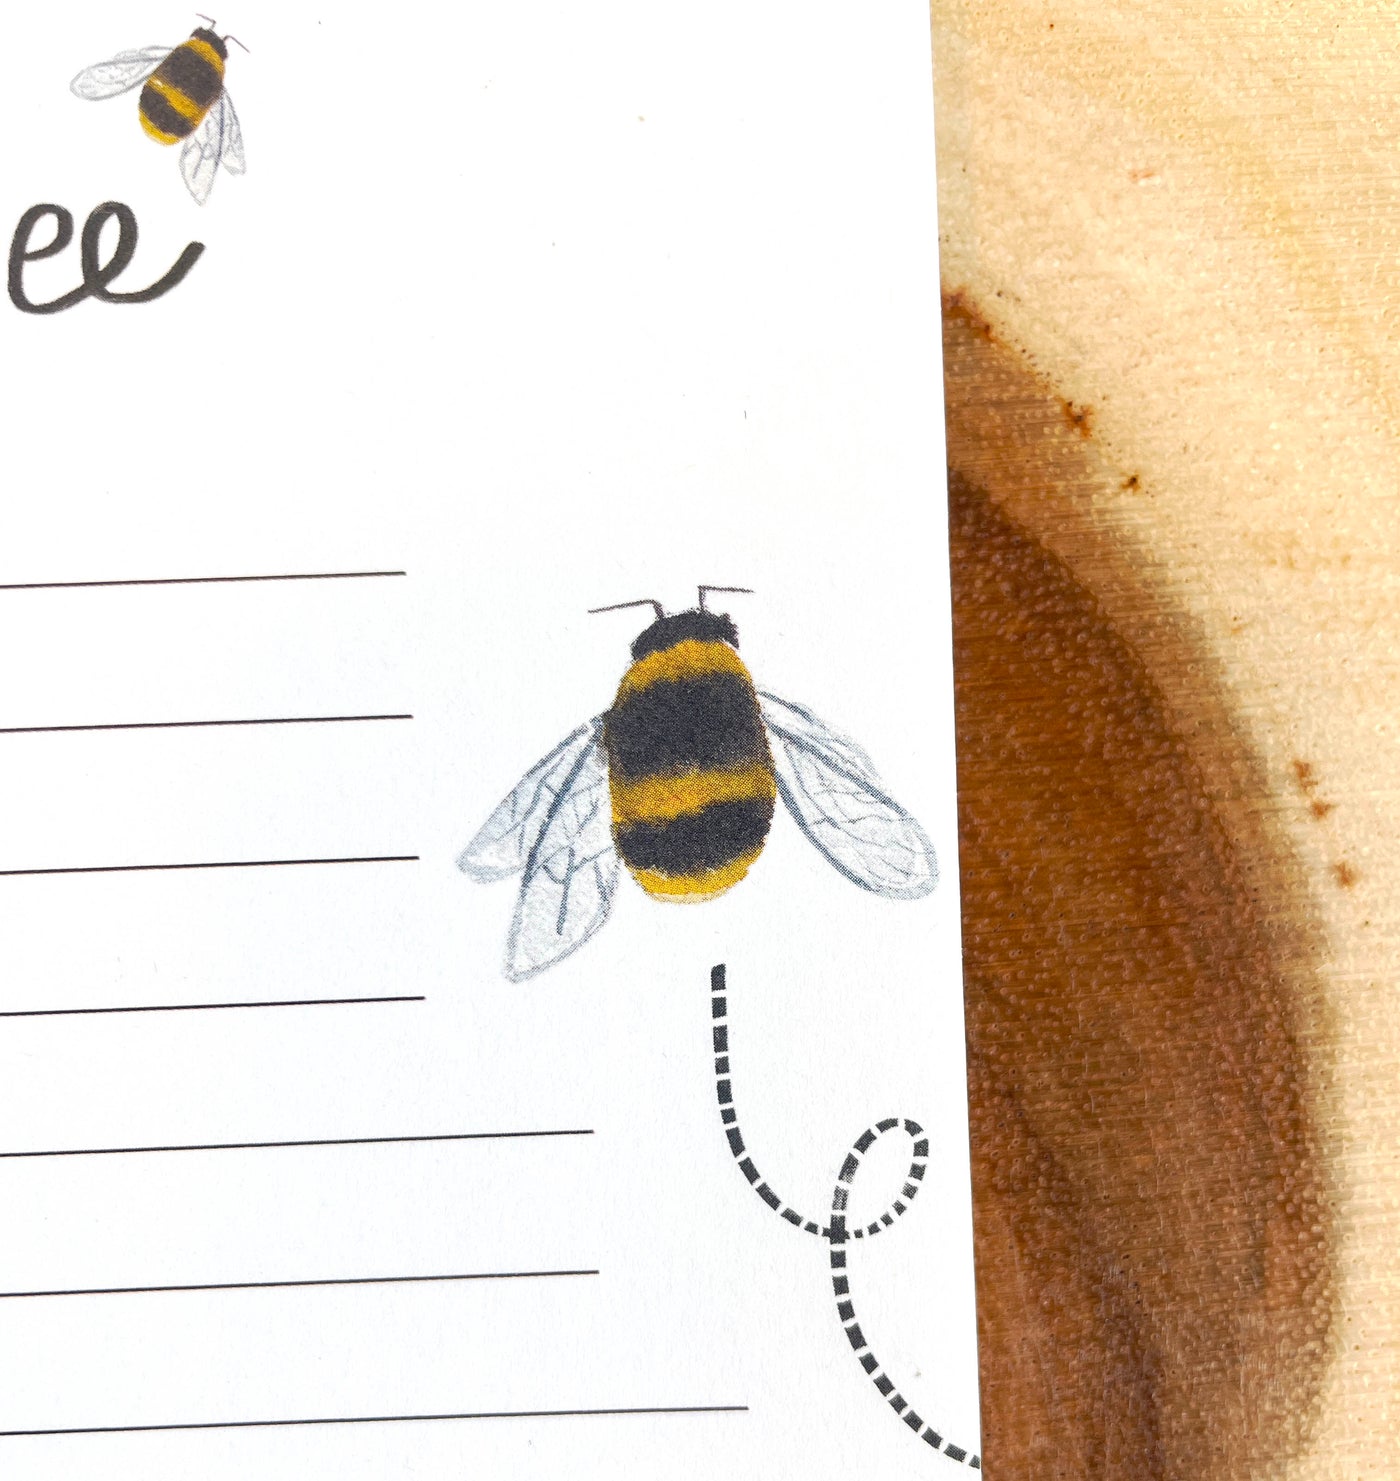 Busy Bee Lined Notepad